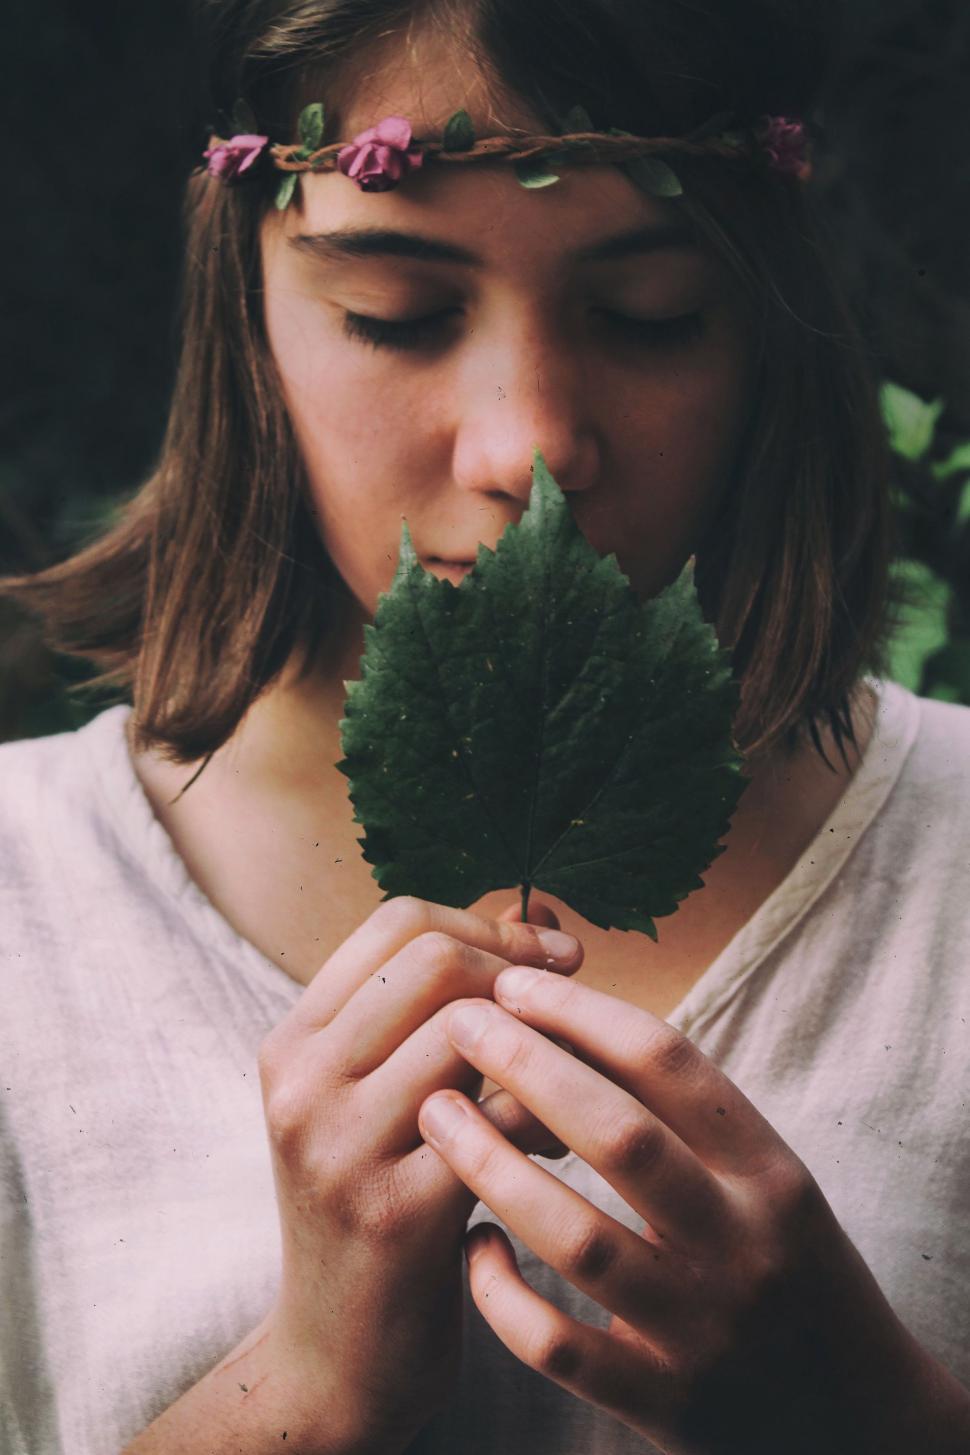 Free Image of Woman Holding a Leaf in Her Hands 